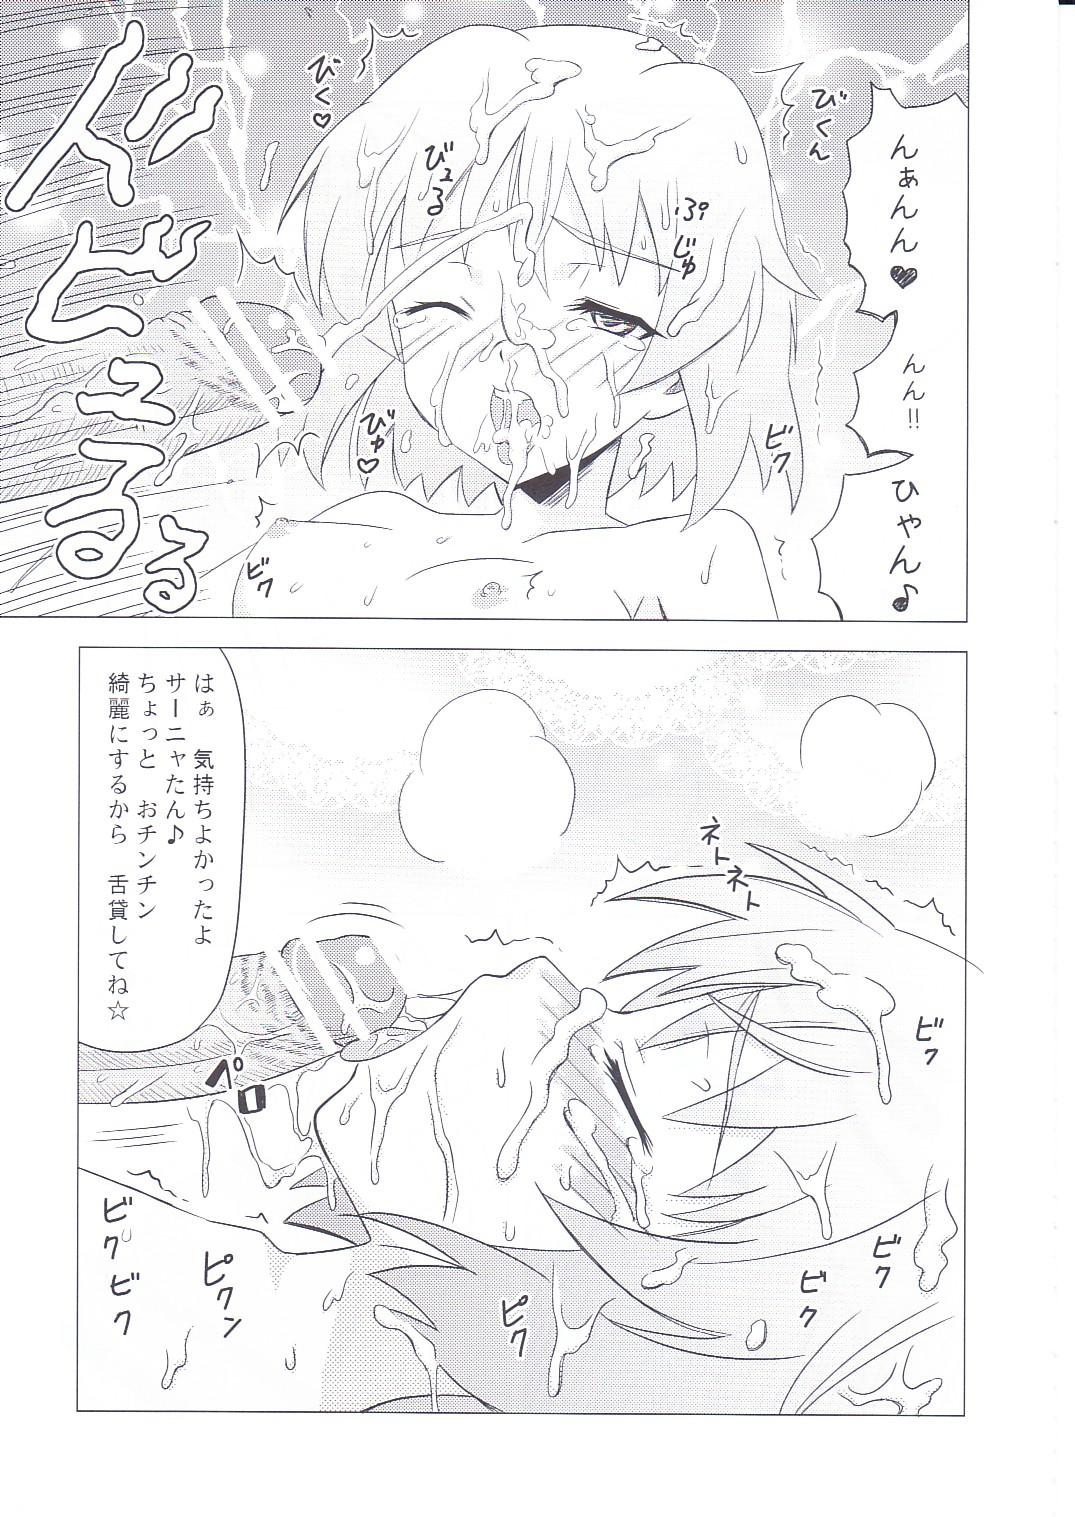 Dirty Sleeping witches - Strike witches Gostosas - Page 12